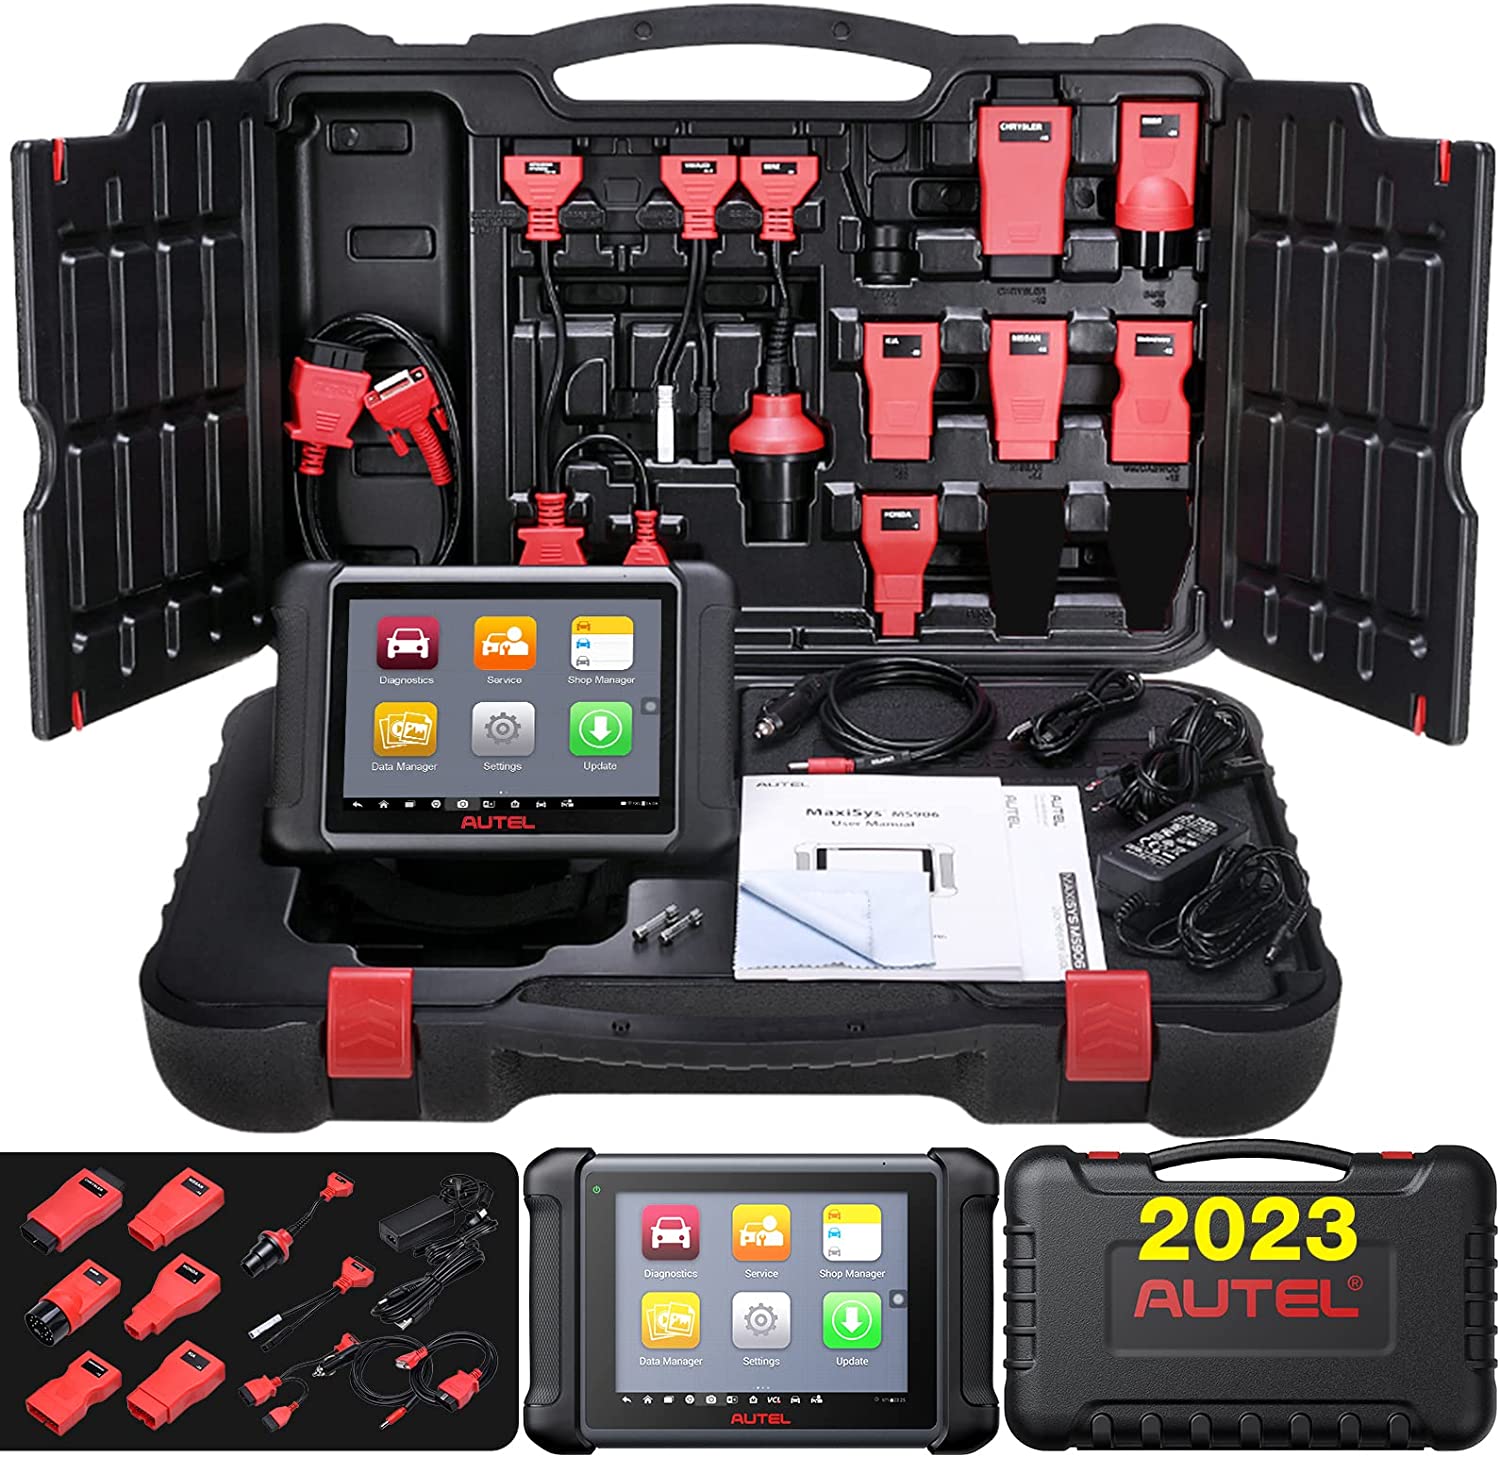 Autel MaxiSys MS906 Diagnostic Scanner: 2023 Updated